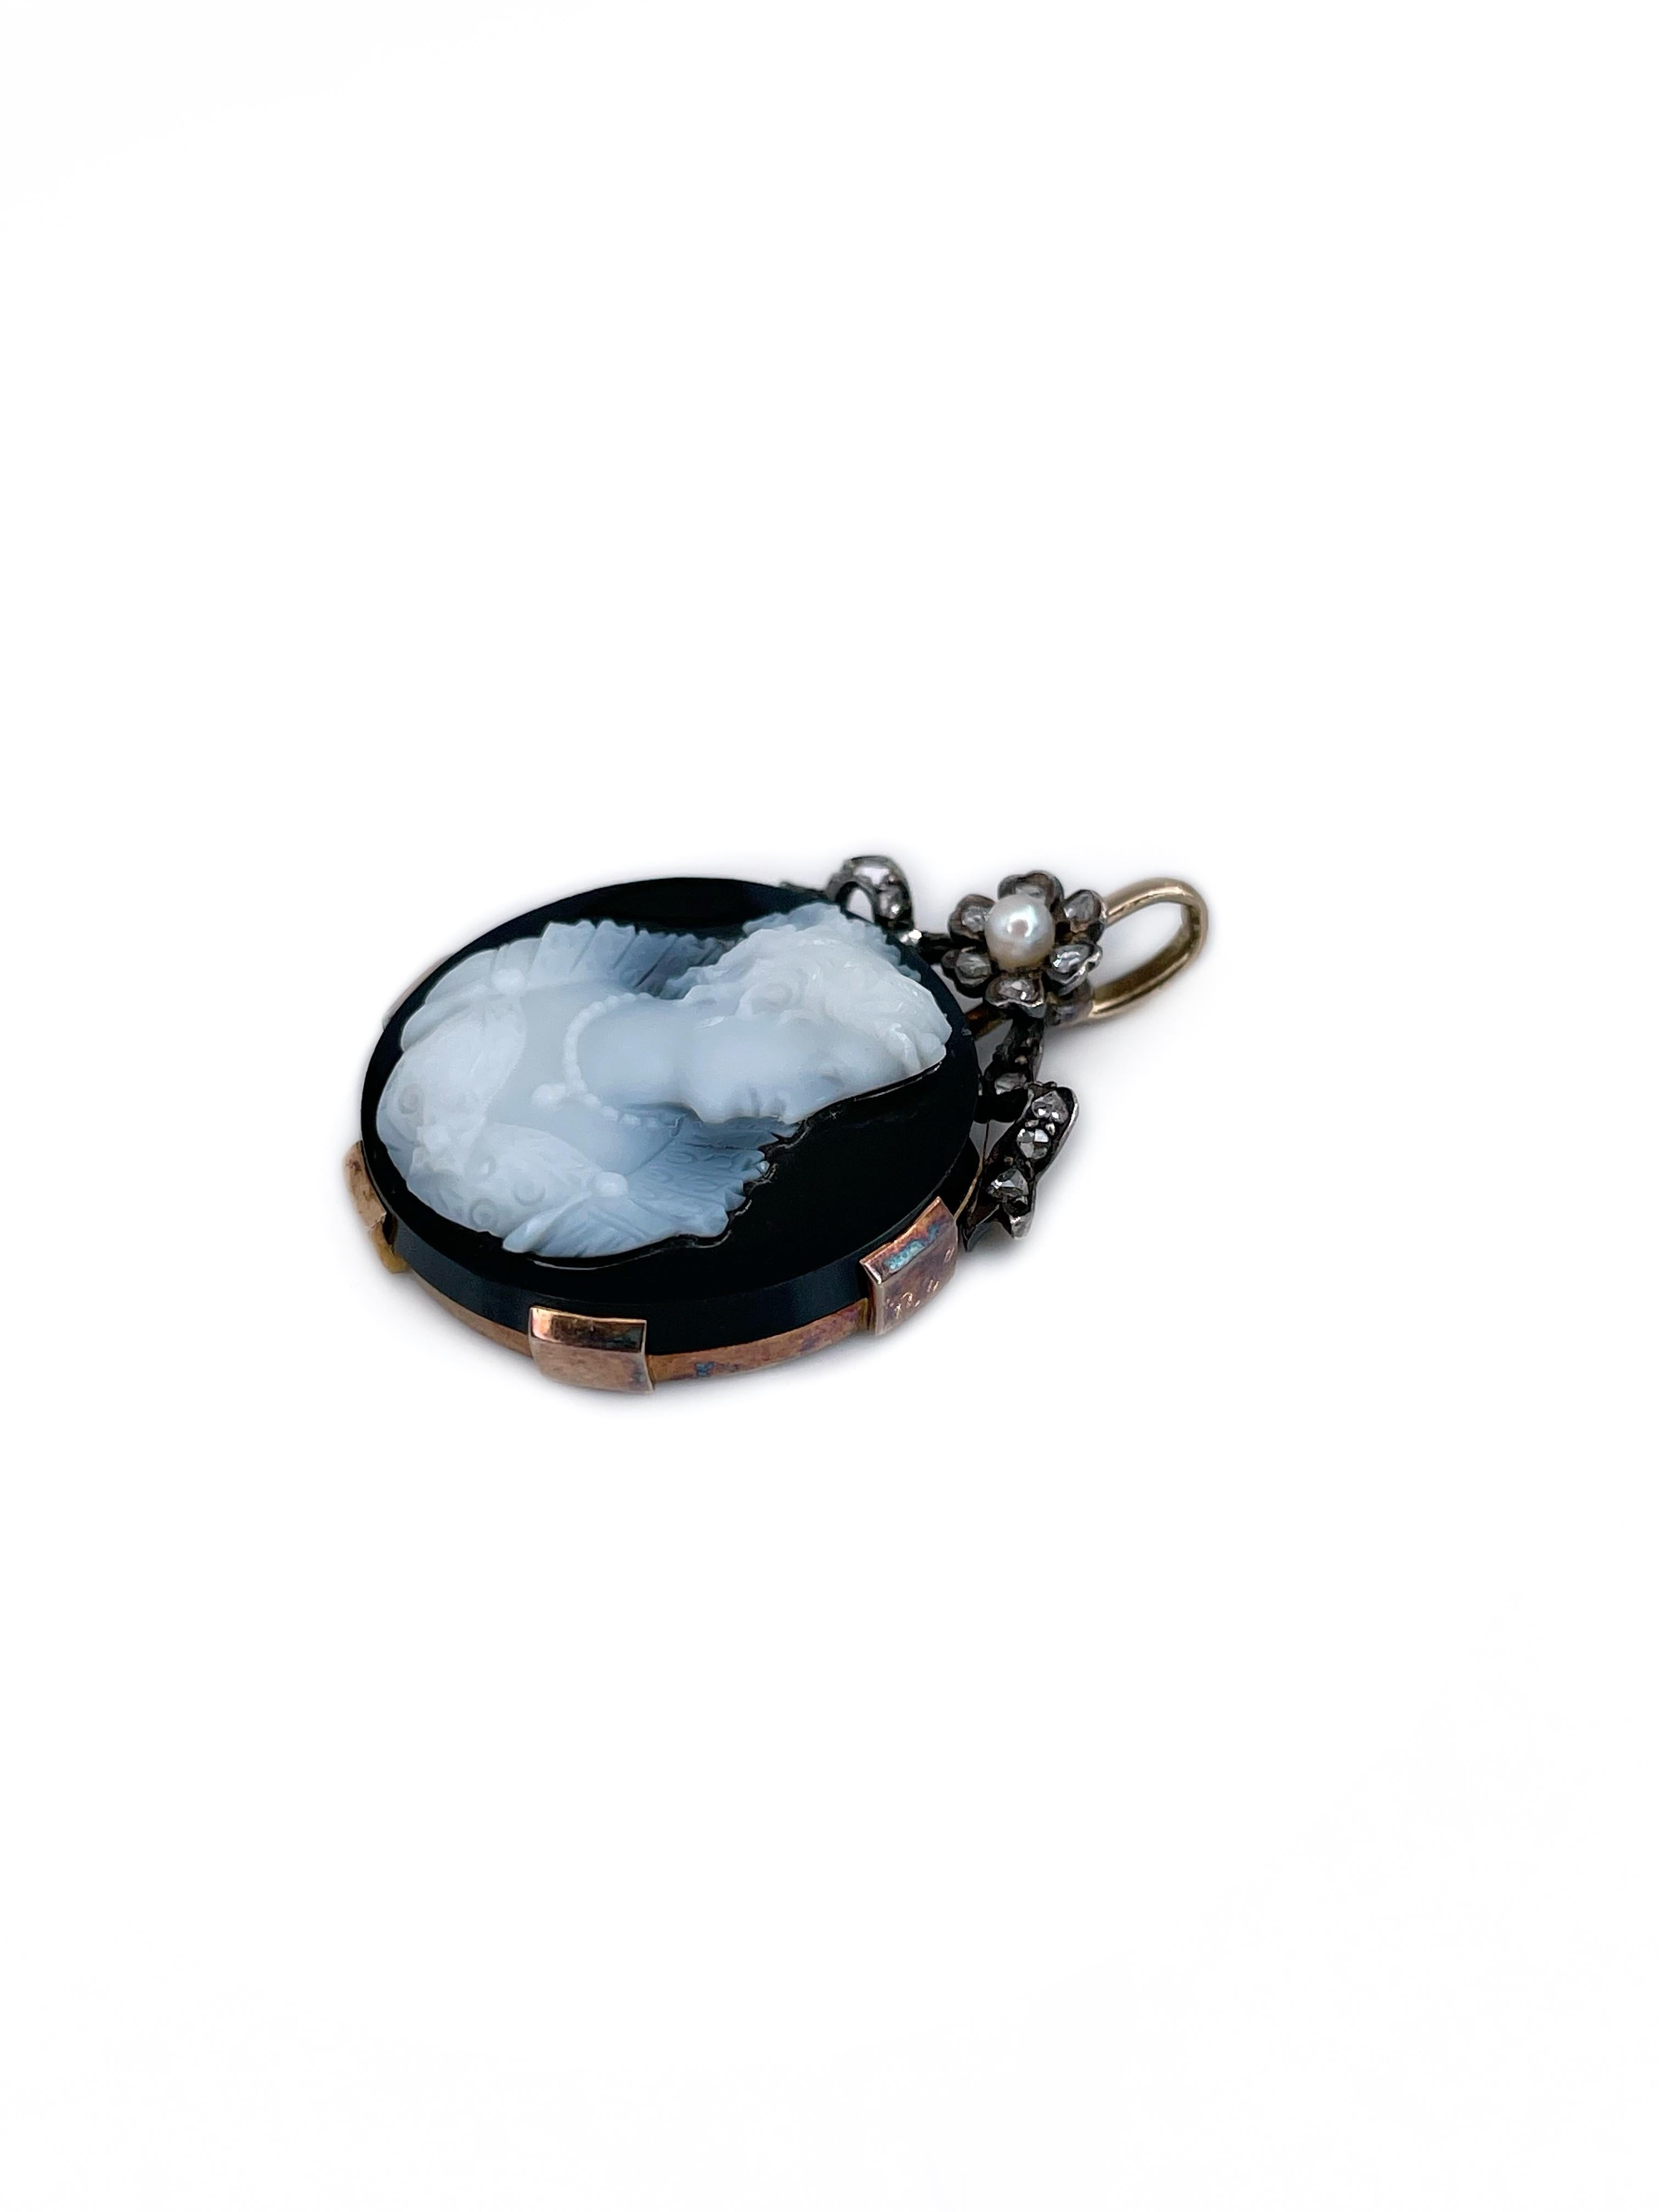 This is a Victorian pendant crafted in 18K gold. Circa 1890. 

It features an onyx cameo depicting a lady. The piece is adorned with rose cut diamonds and a pearl.  

There are some kind of numbers carved on the back side. 

Weight: 5.73g
Size: